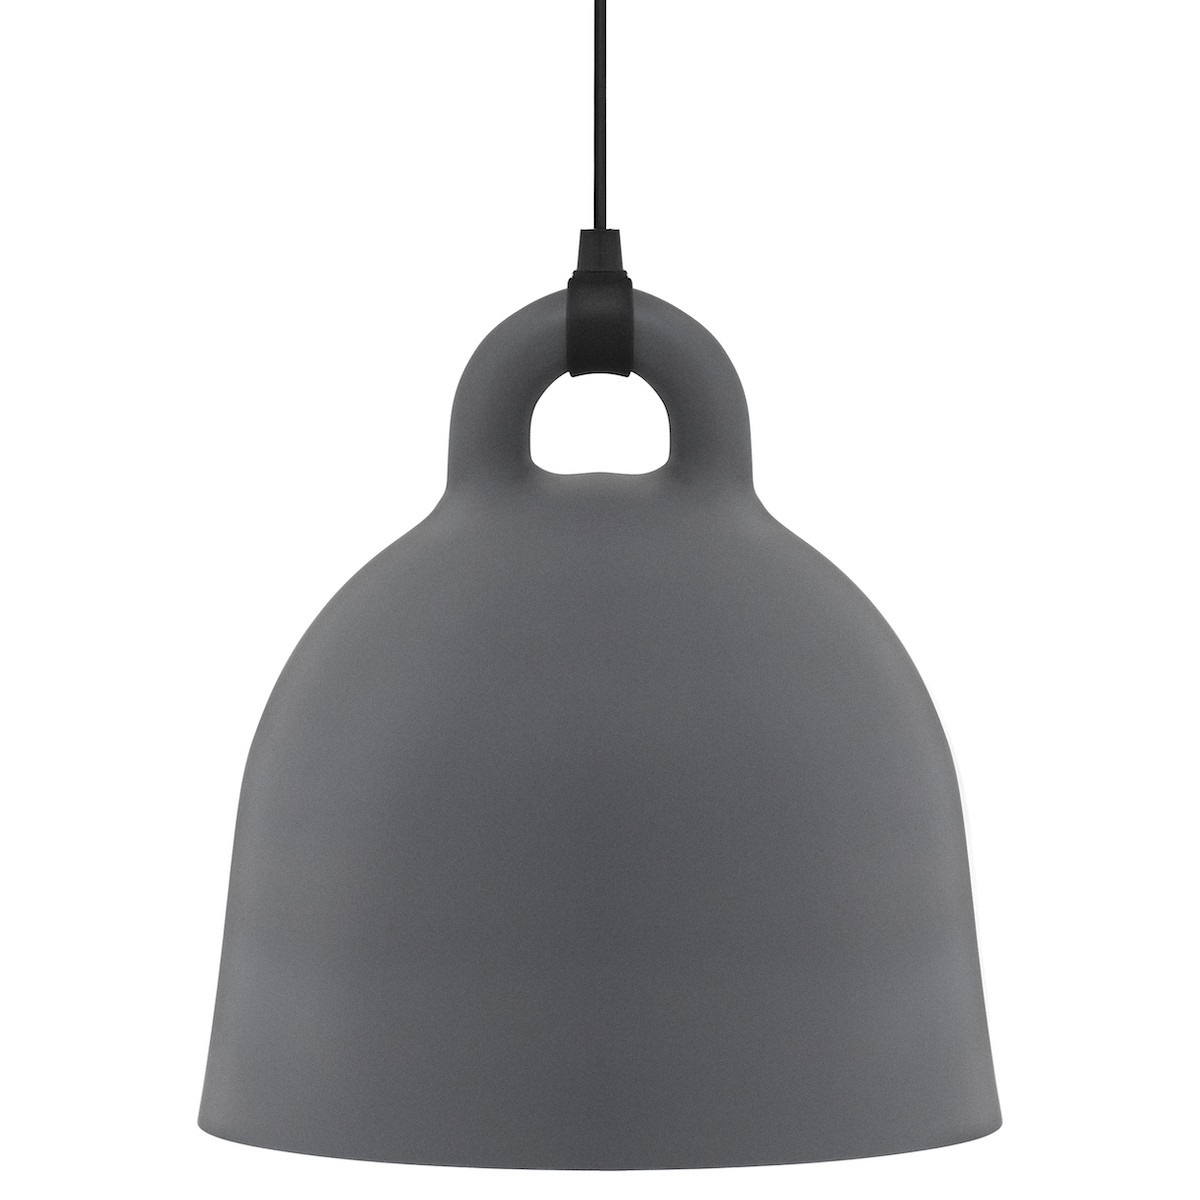 extra small - grey - Bell lamp